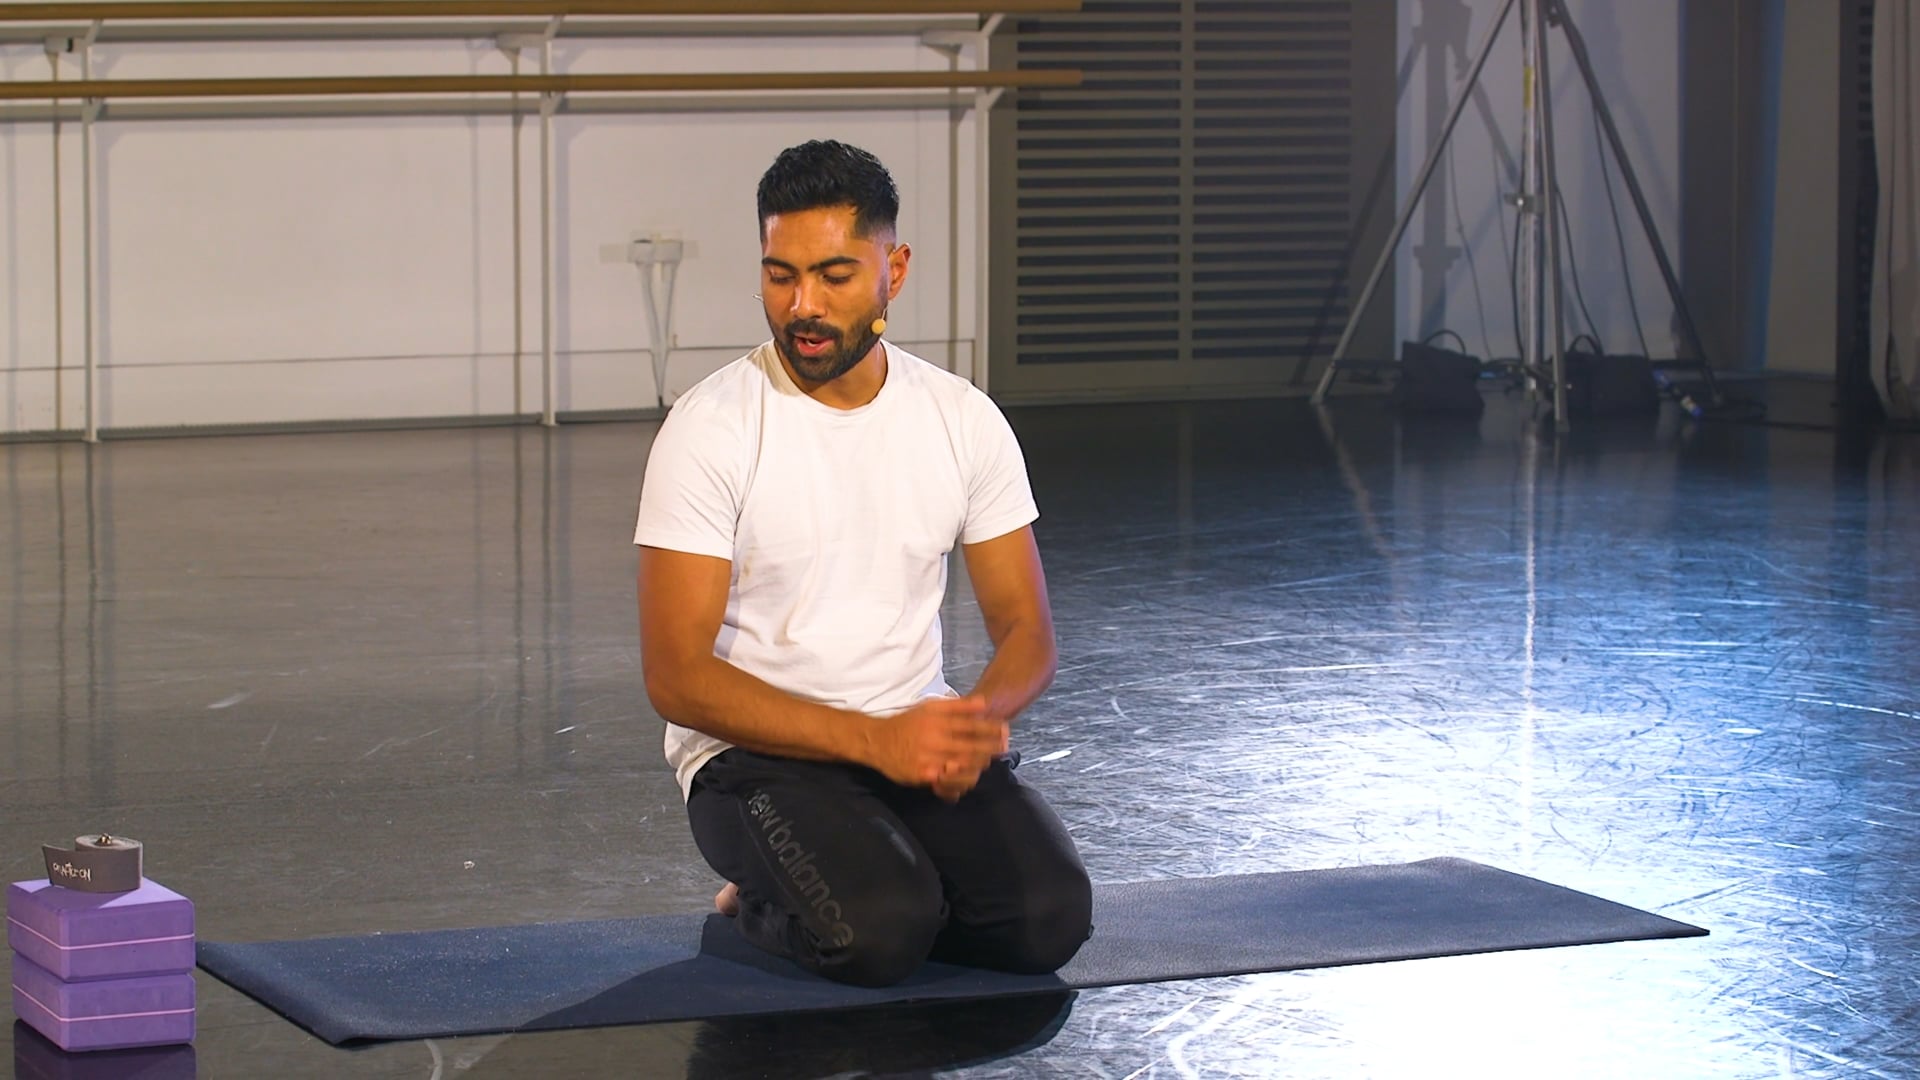 a man sitting on a yoga mat in a room.